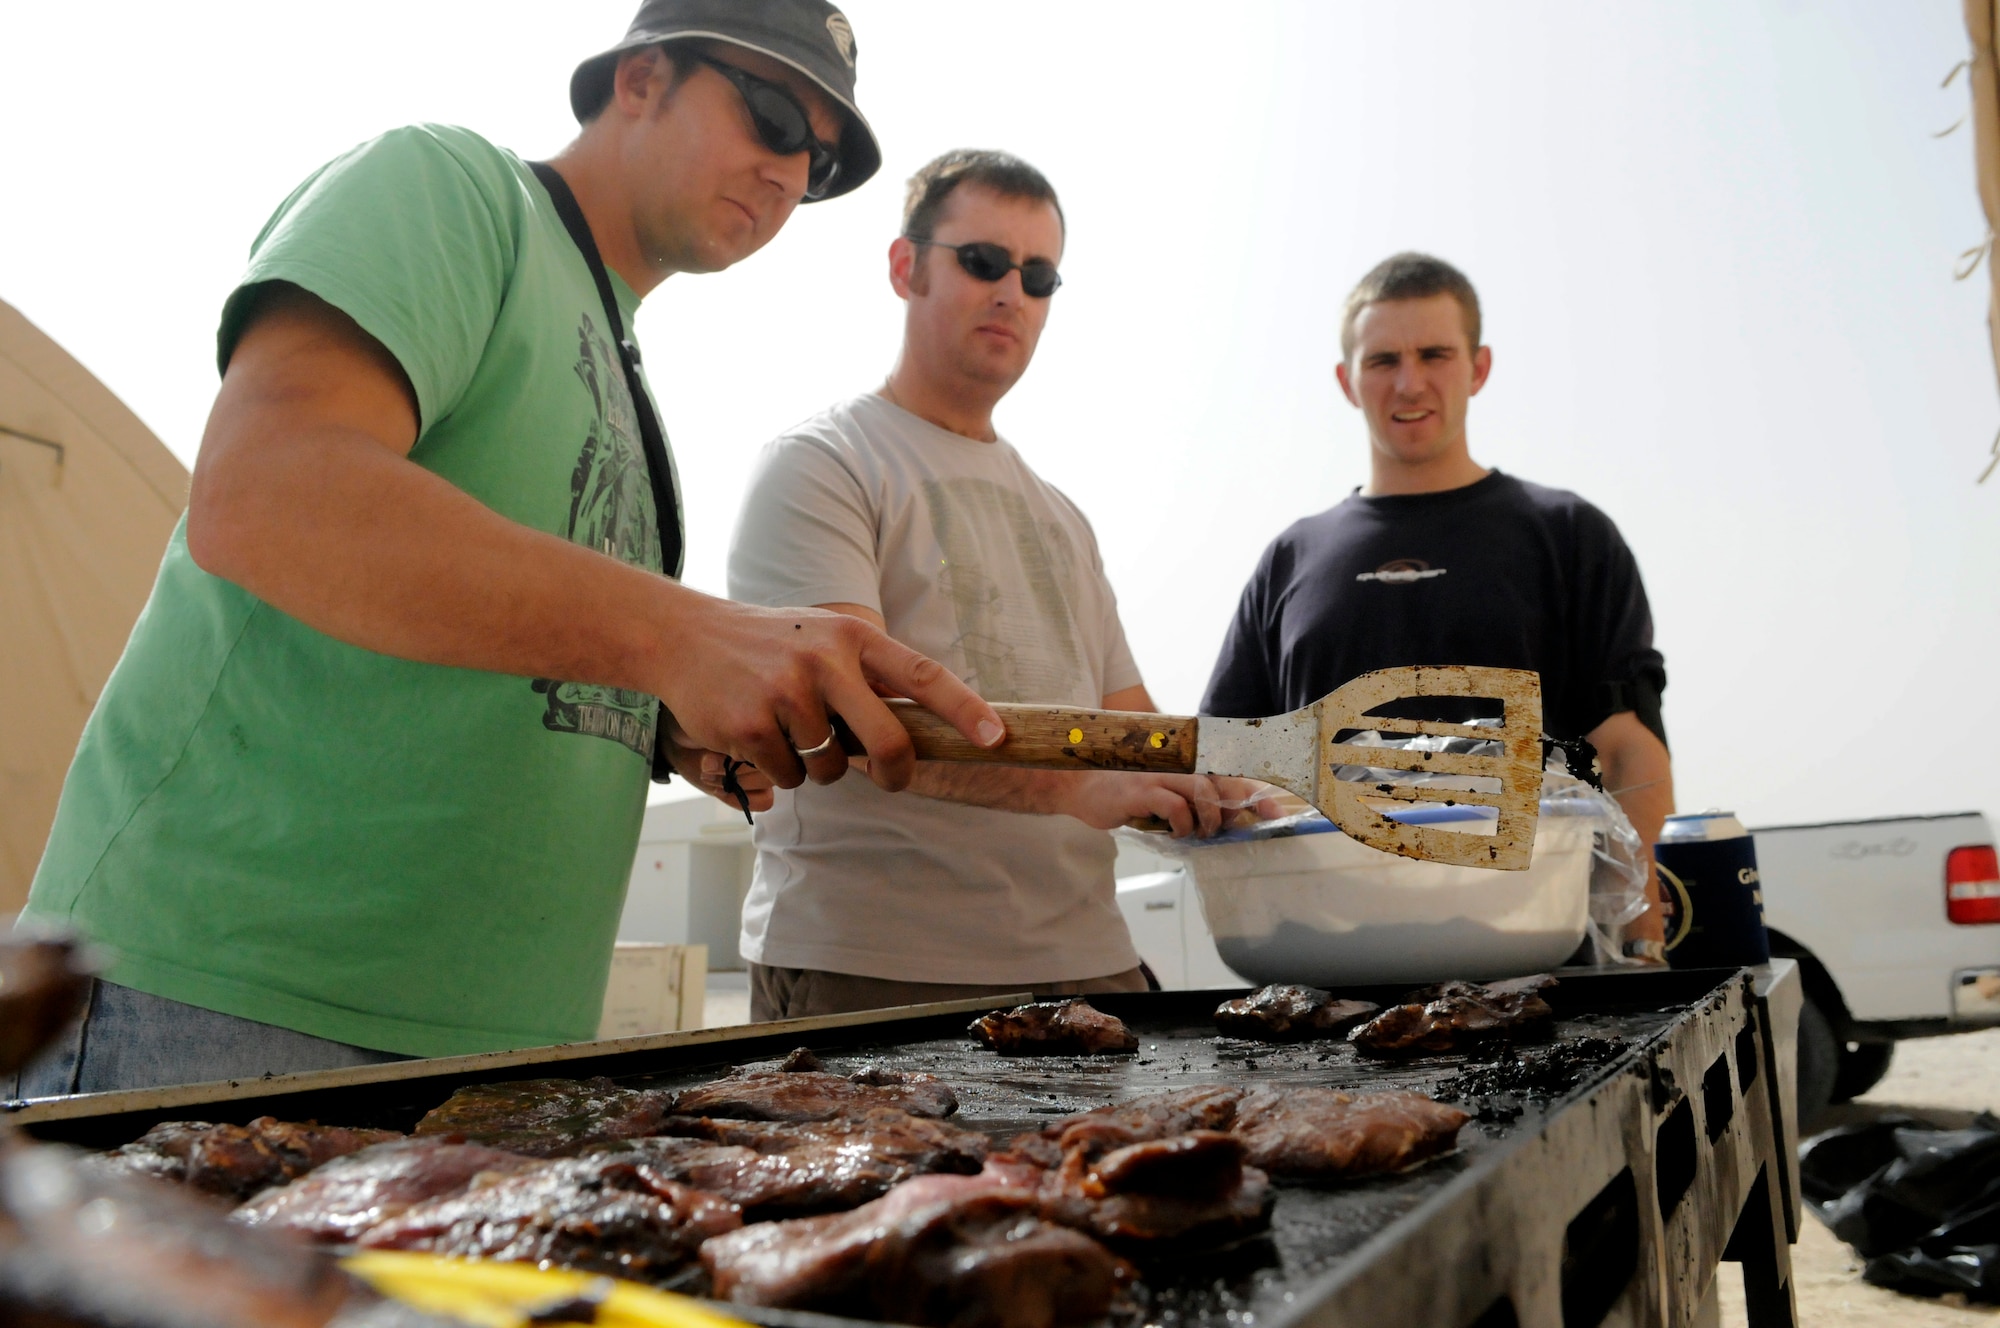 The Austrailian military contingent celebrated Australia Day at a non-disclosed Southwest Asia location, Jan. 26, 2010. The celebration included a barbecue, conversation, mingling with Coalition forces and watching a broadcast of an Australian team competing in a cricket match. (U.S. Air Force photo by Senior Master Sgt. David Byron)[RELEASED]